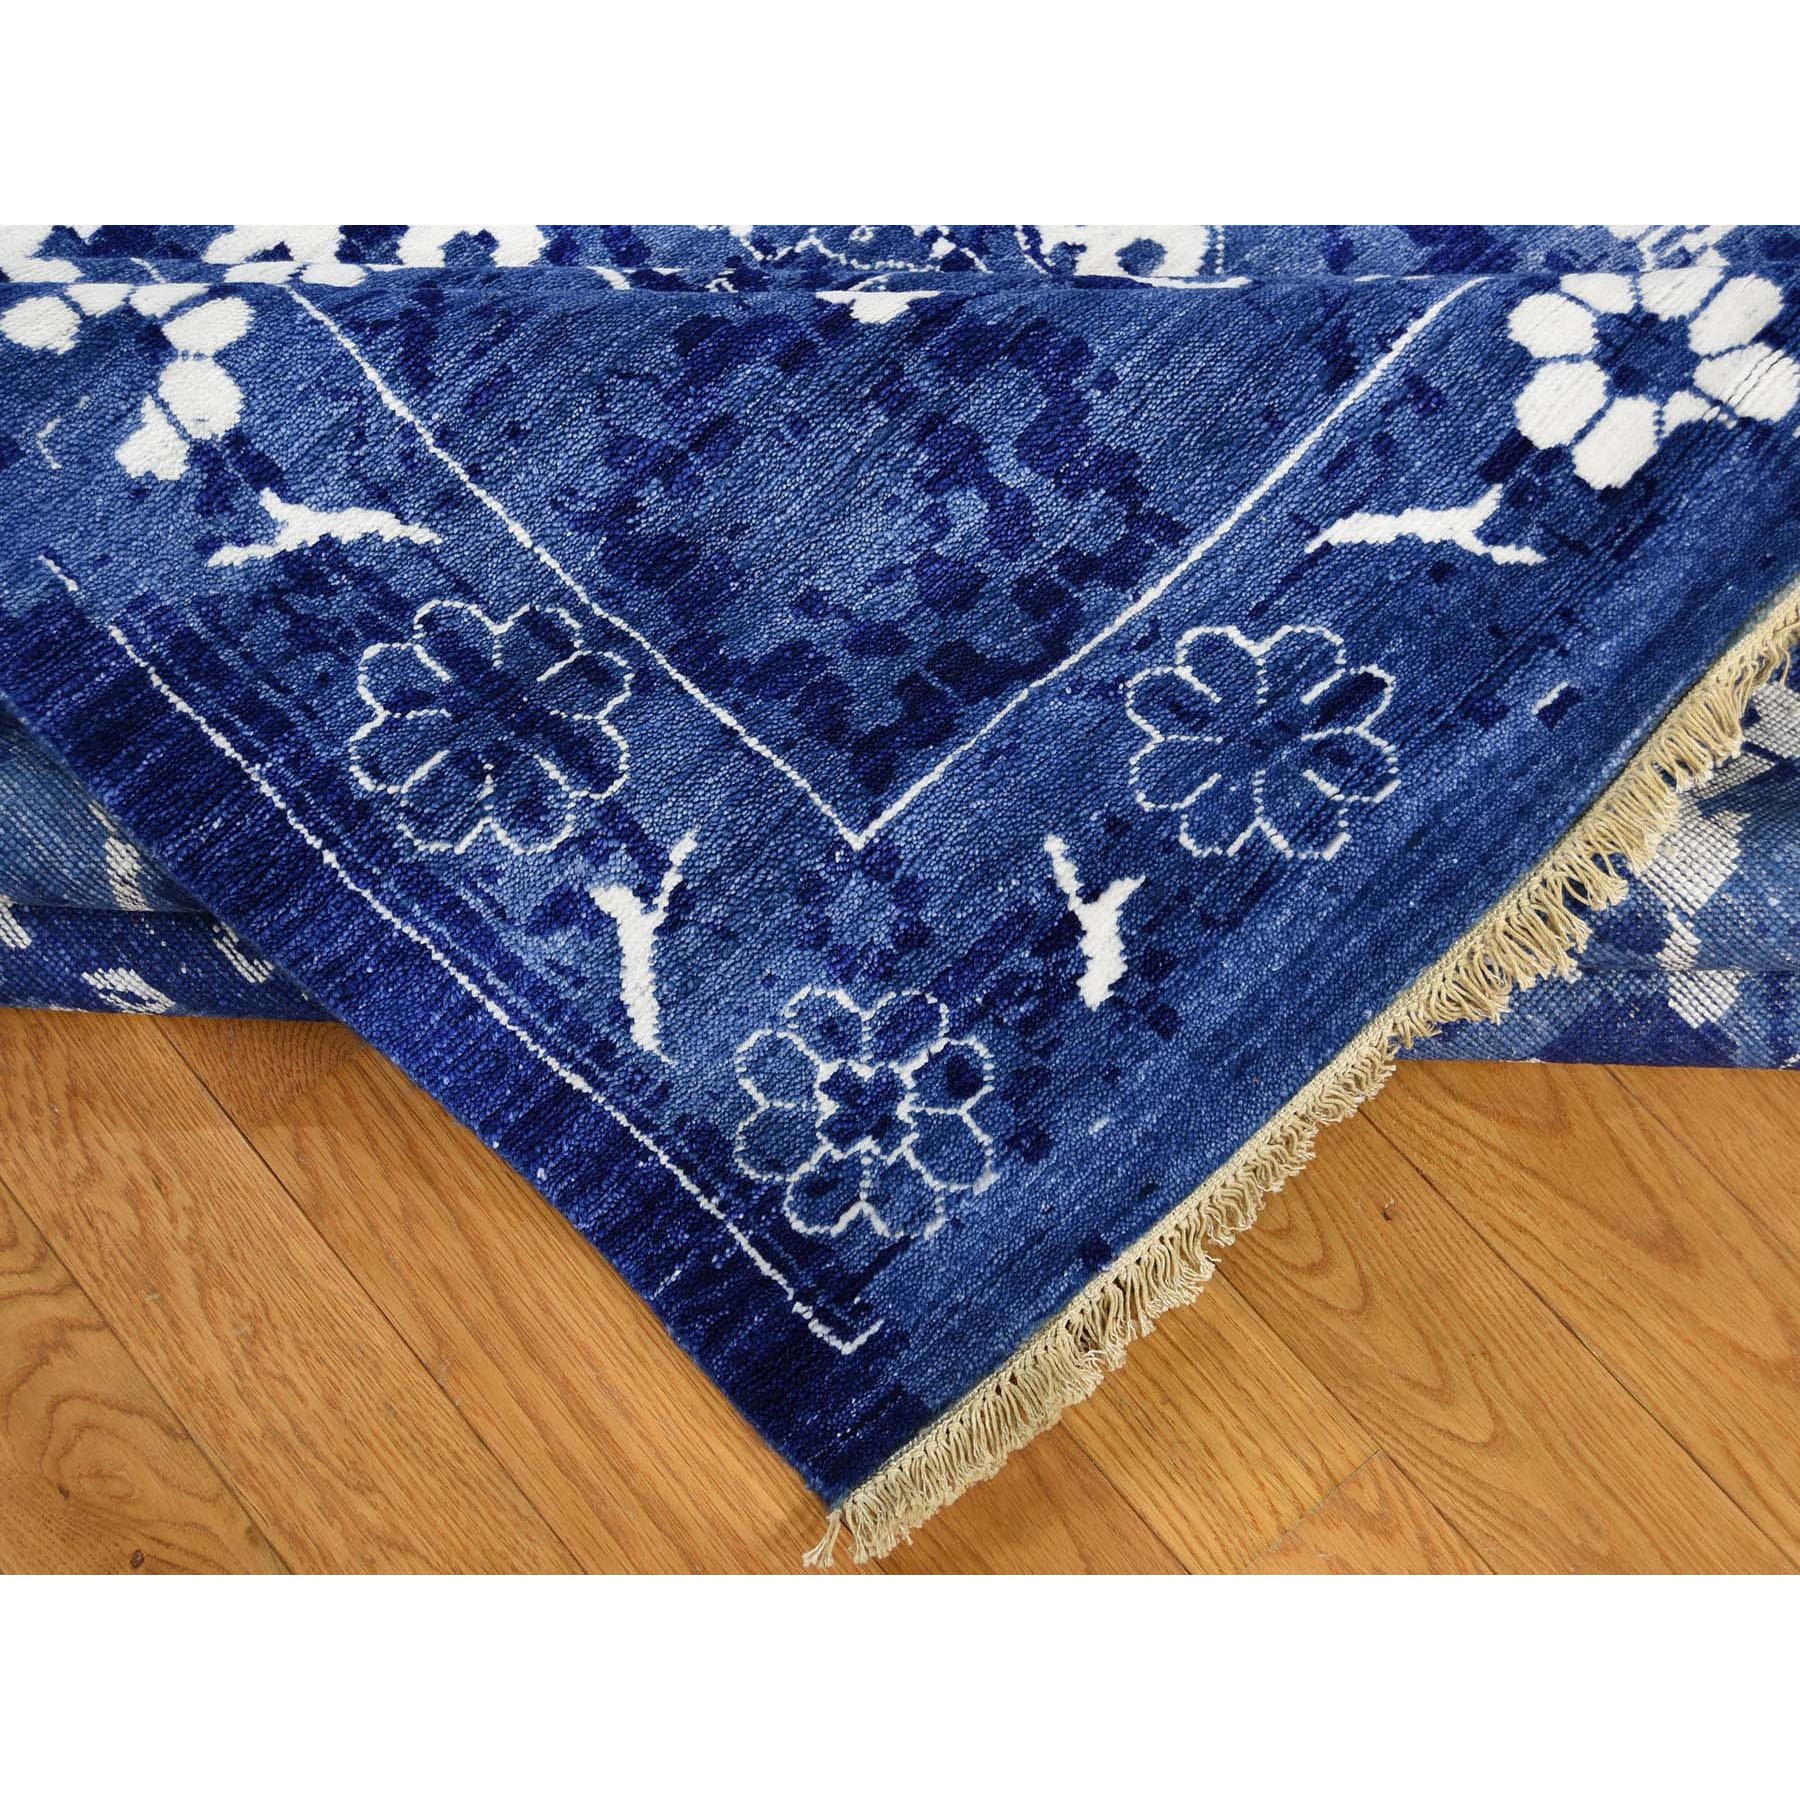 9-1 x12-1  Blue Wool And Silk Tone On Tone Tabriz Oriental Hand Knotted Rug 